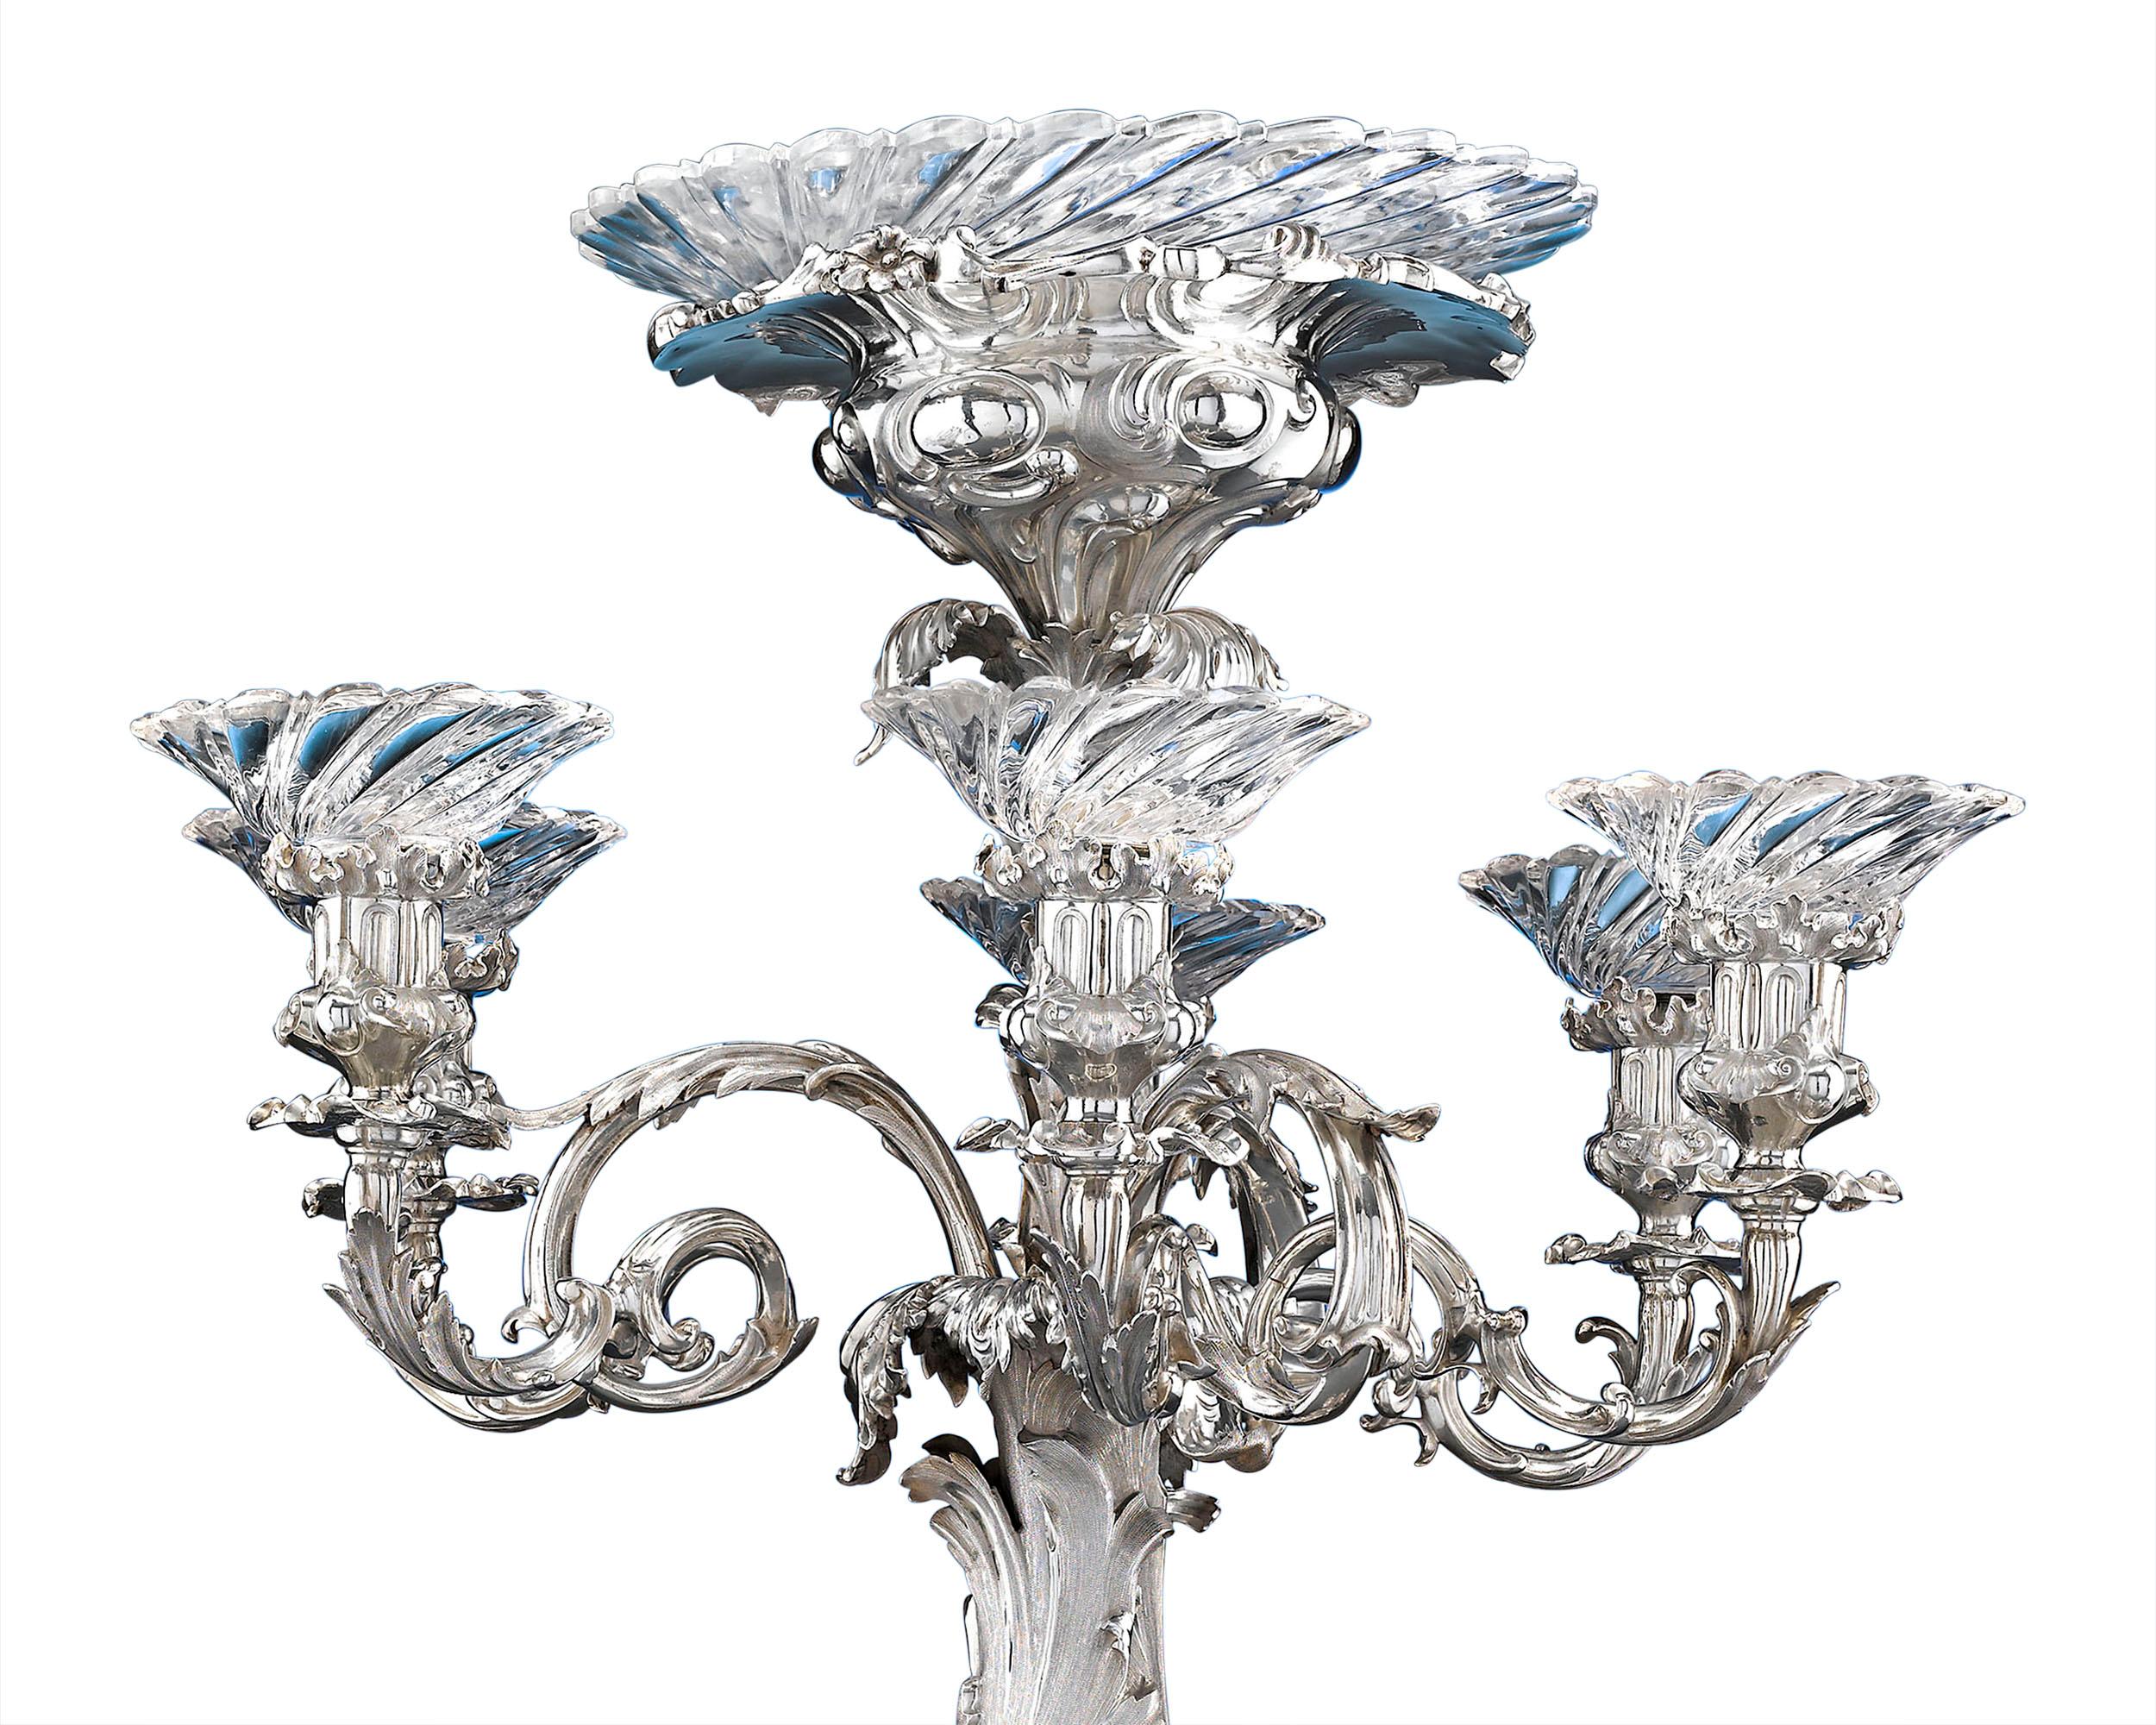 in 1799 the silver epergne cost